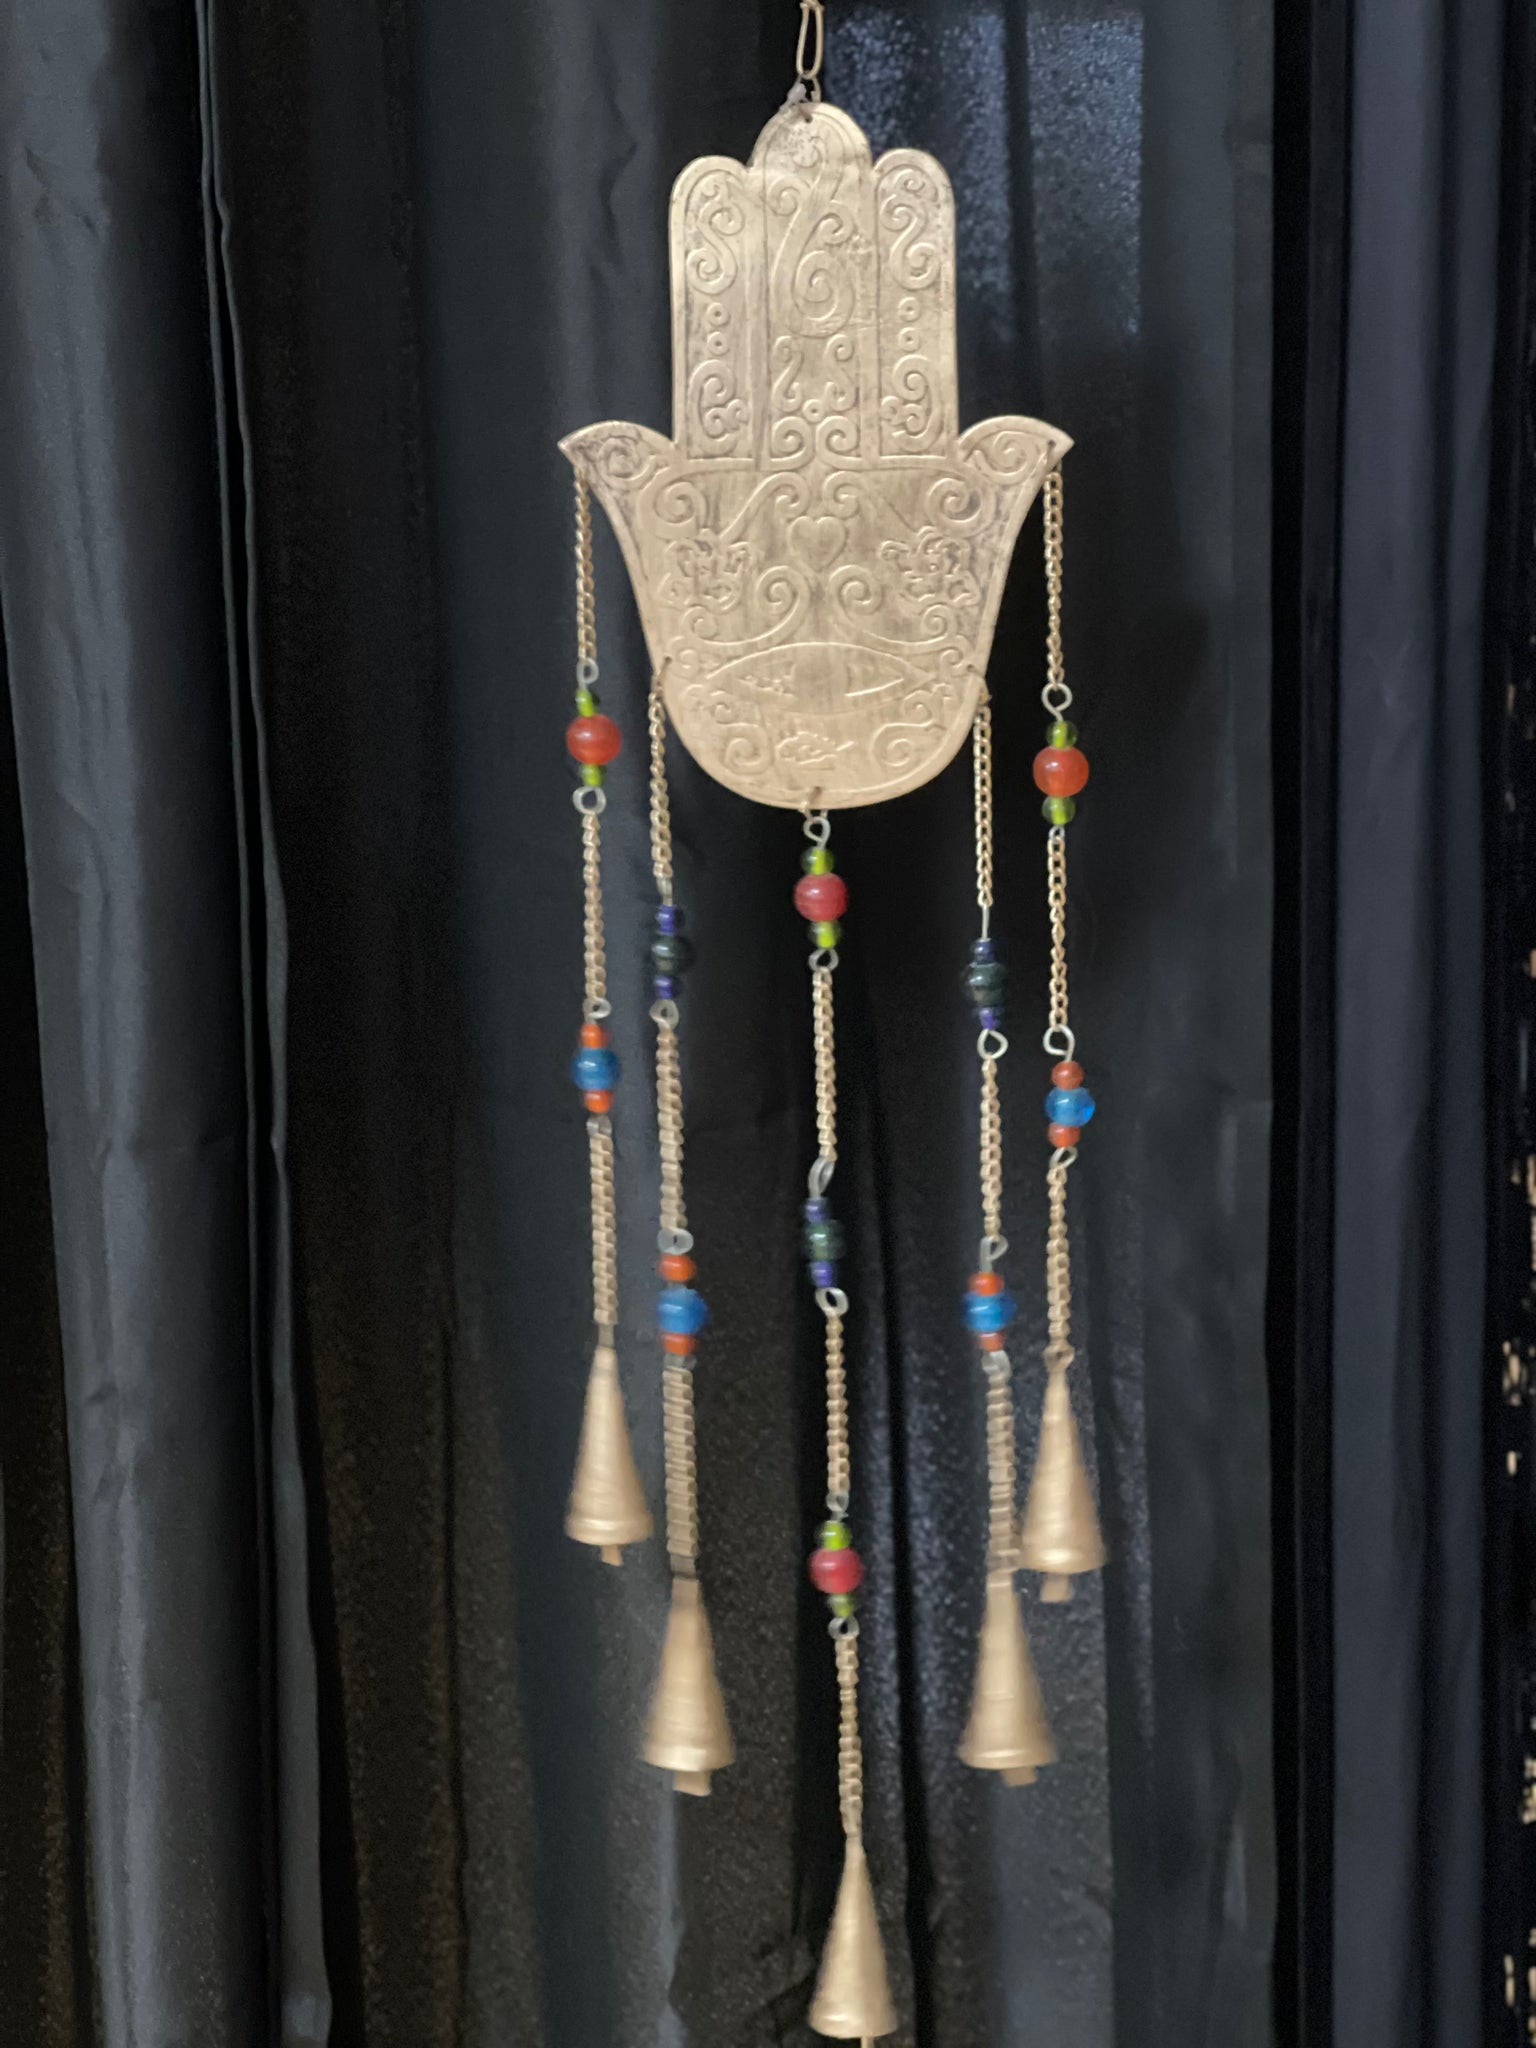 Hamsa / Fatima Hqnd Recycled Iron Bells and Chimes Wind Chime - Tree Of Life Shoppe